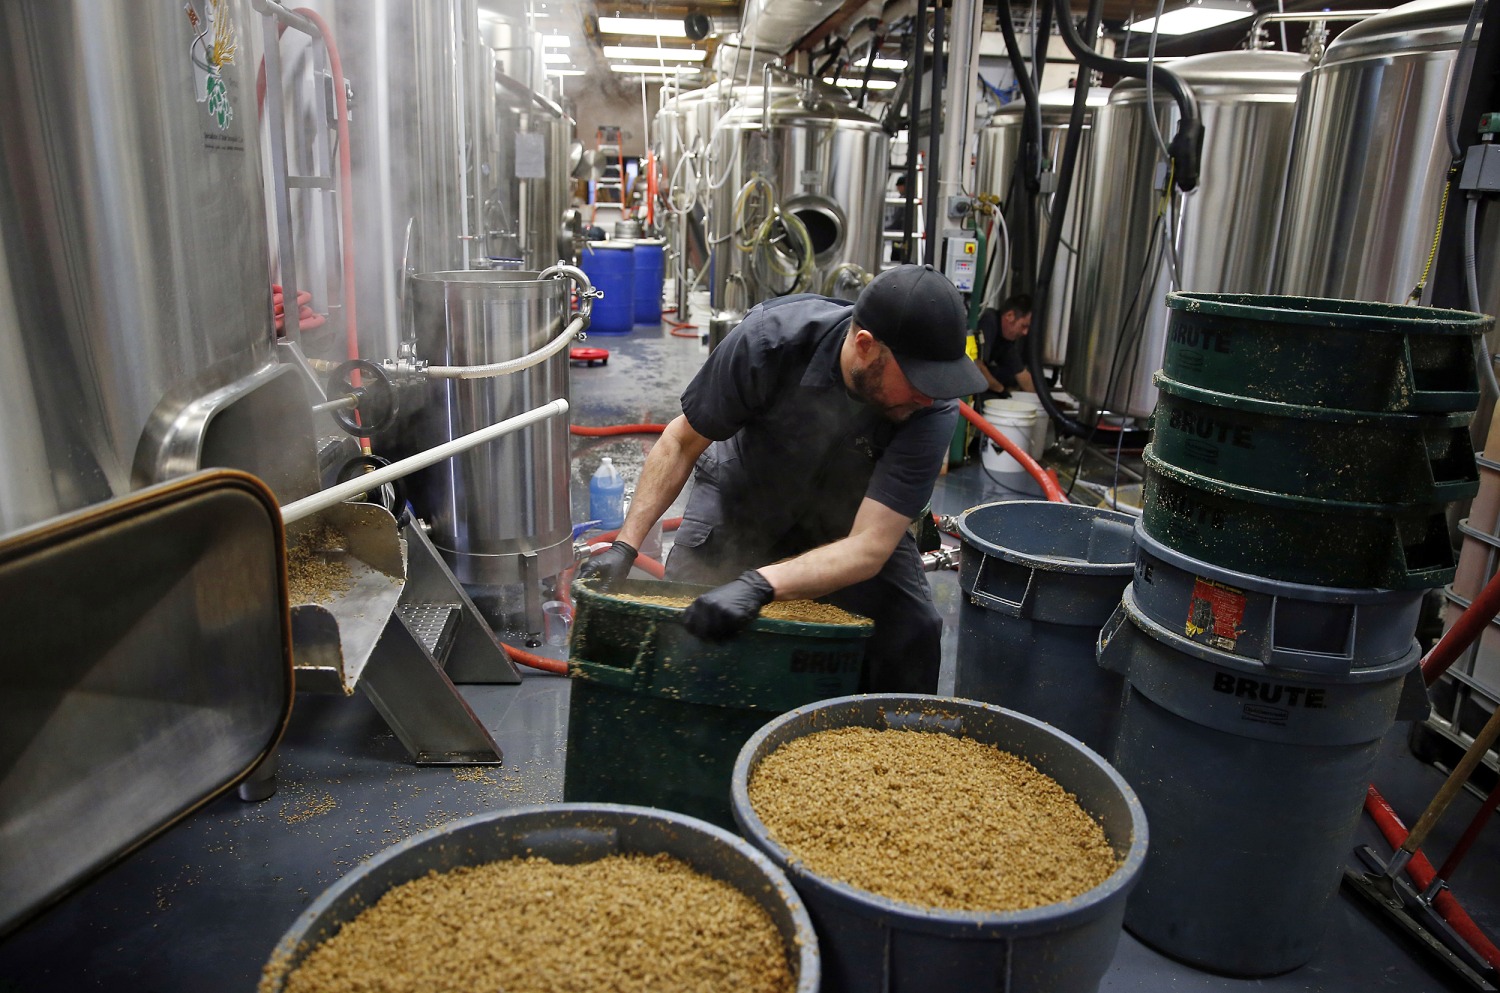 Night Shift Brewing to Cease Production at Everett MA Facility – NBC Boston